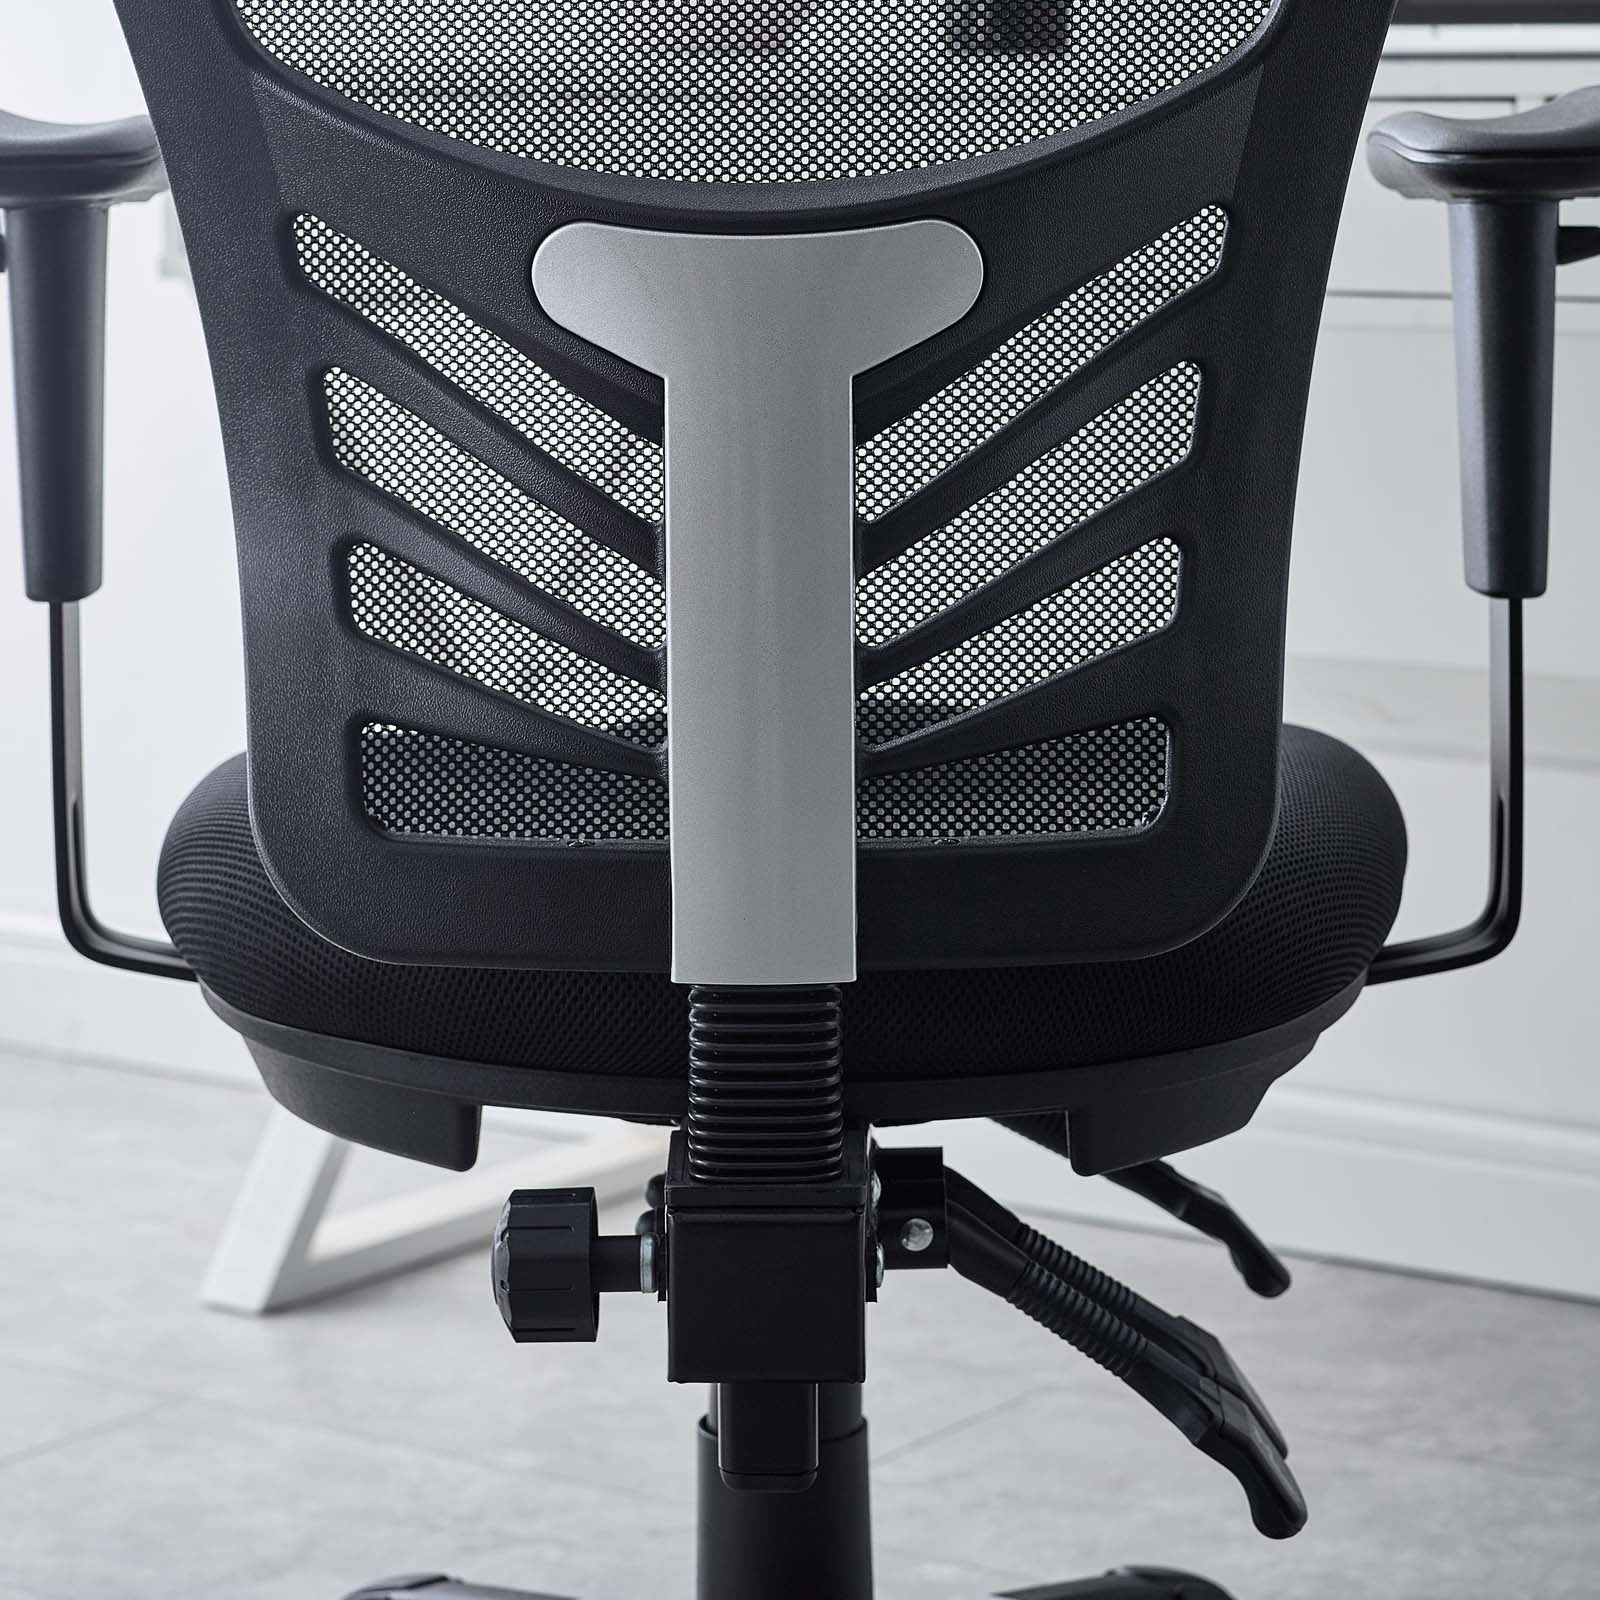 Modway Task Chairs - Articulate Mesh Office Chair Black